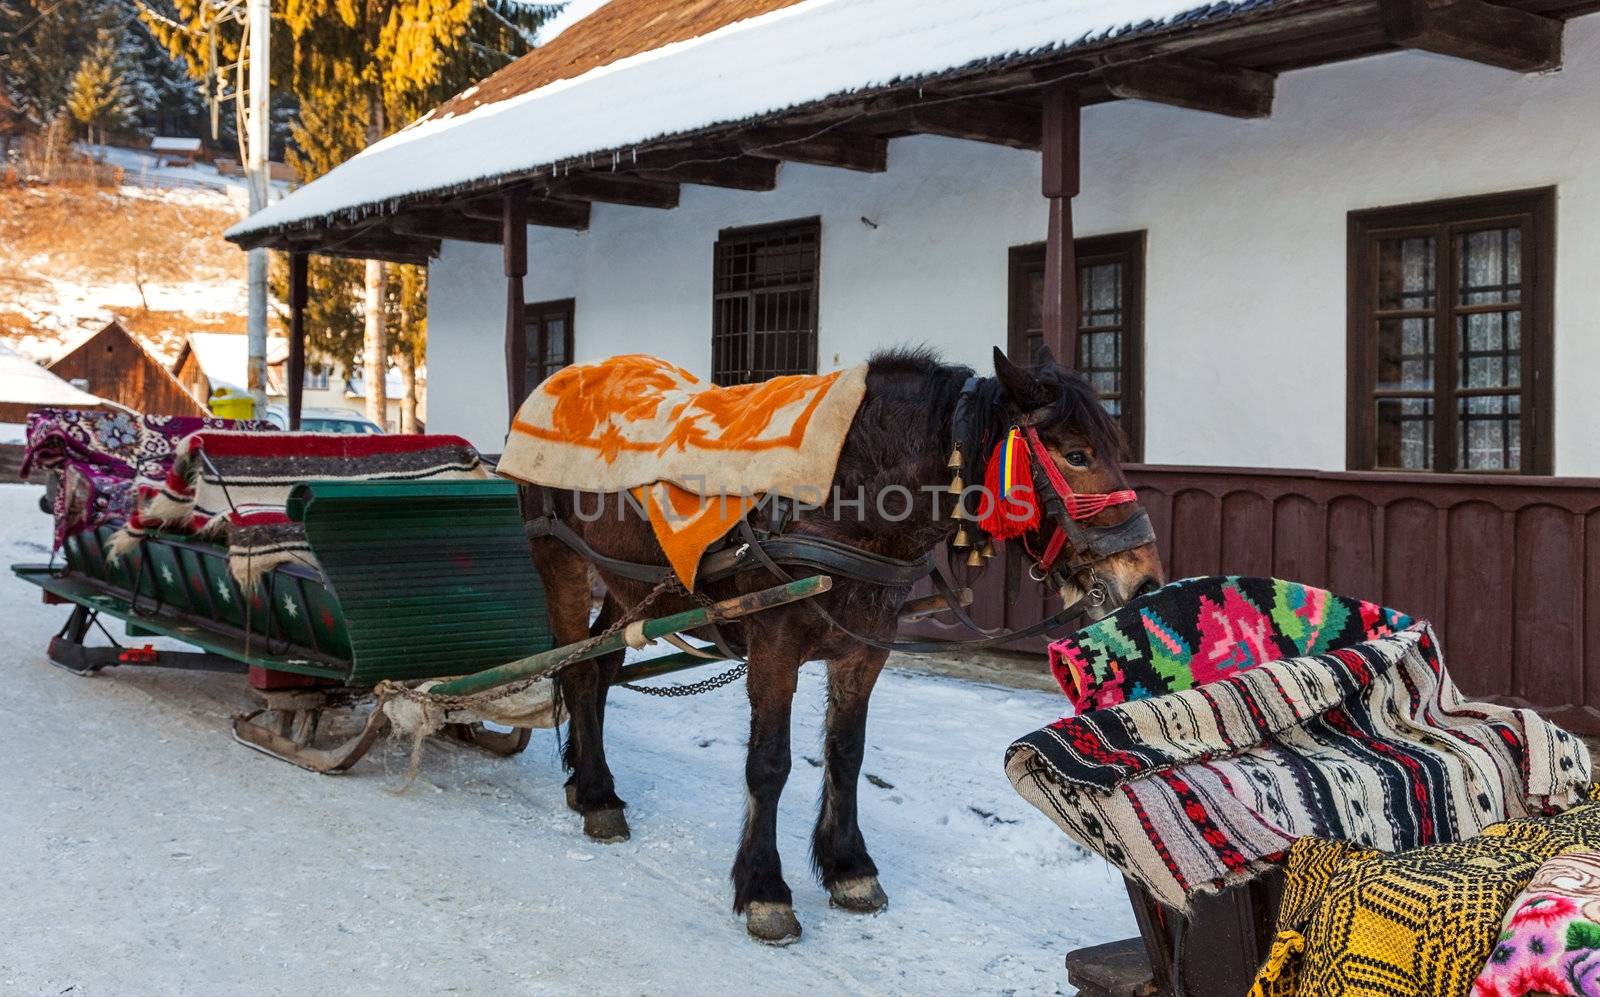 Image of a traditional sledge with horse waiting for clients in front of a characteristic house in a small touristic Romanian village.